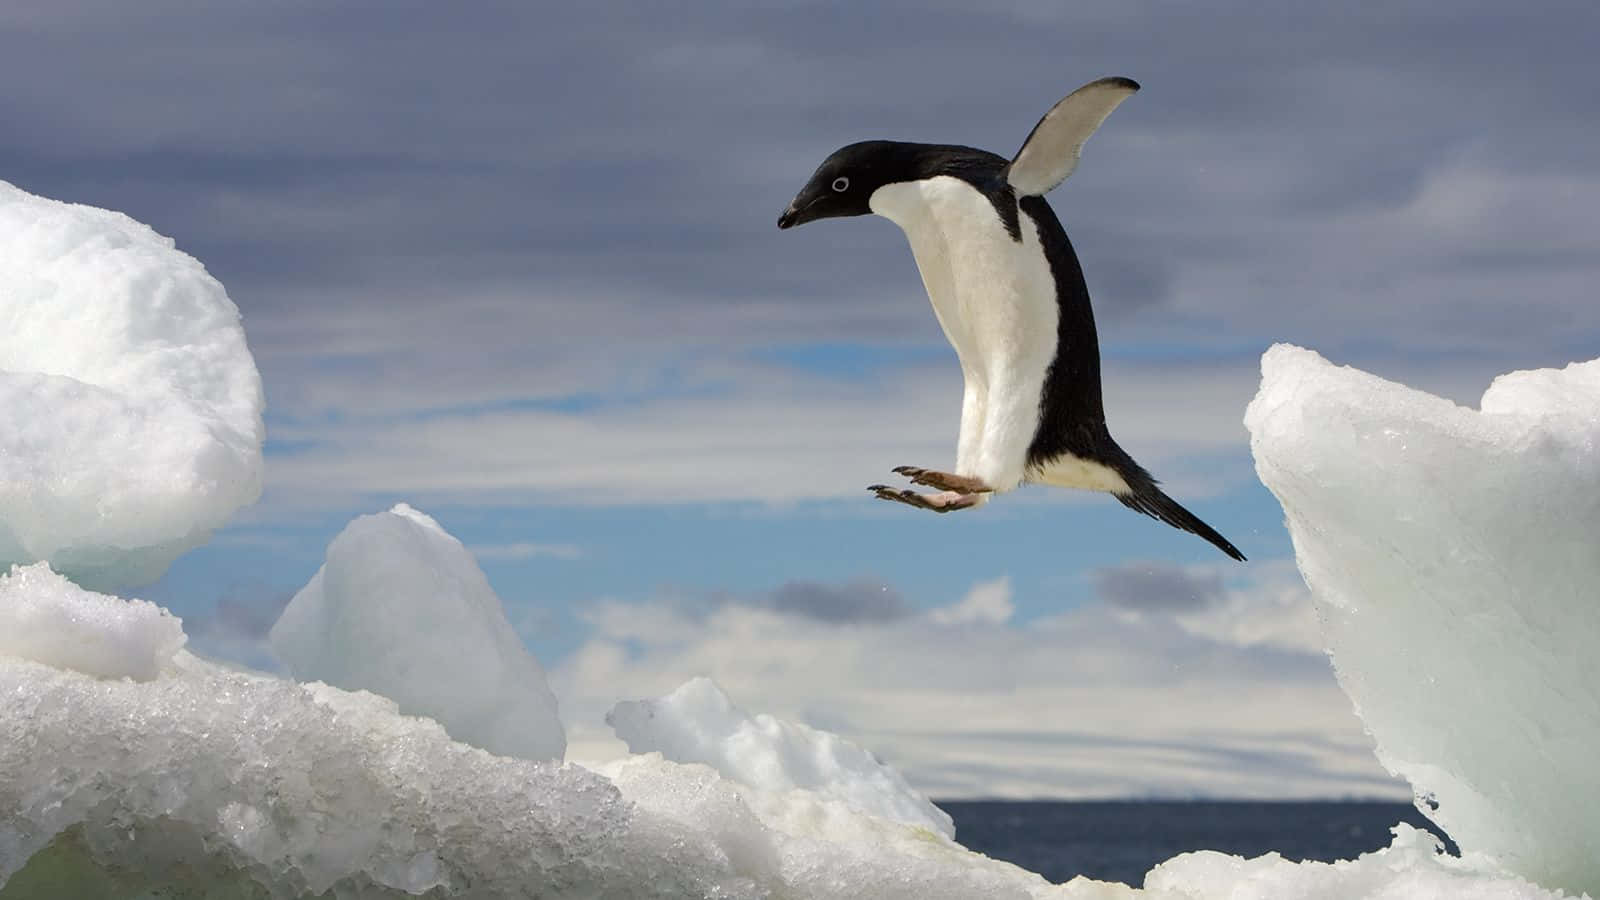 A cute little penguin making its way across the ice